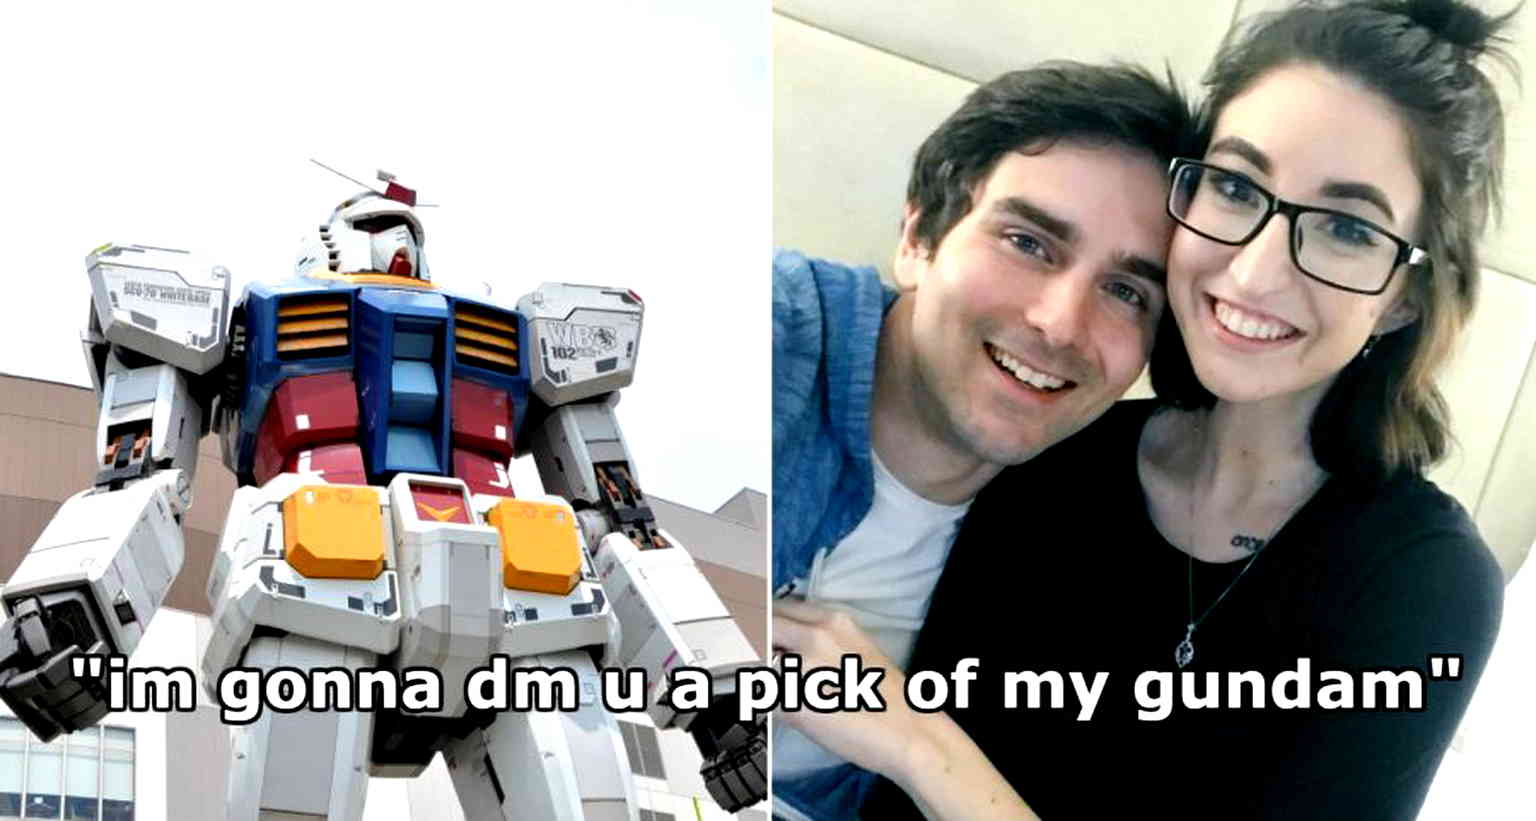 Woman Thinking ‘Gundam’ Pic is a Dick Pic Makes the Best Love Story Ever